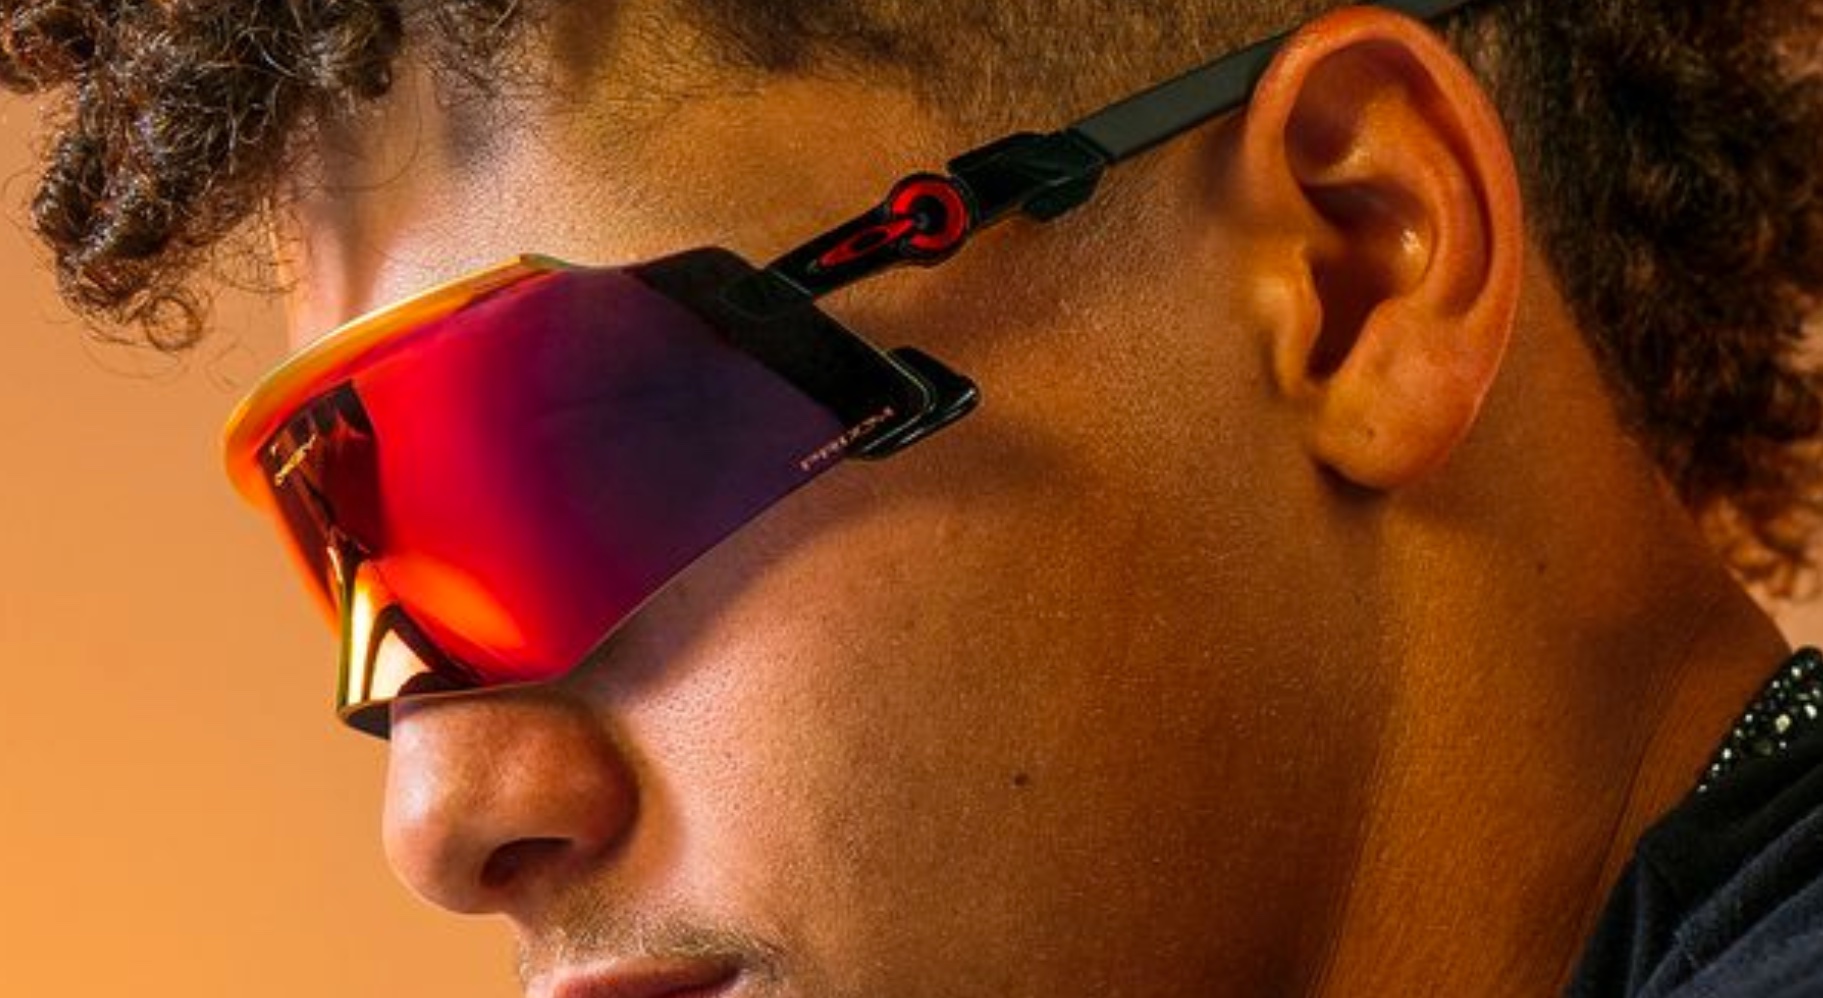 Oakley drops 'Kato' sunglasses this summer that are made for sports